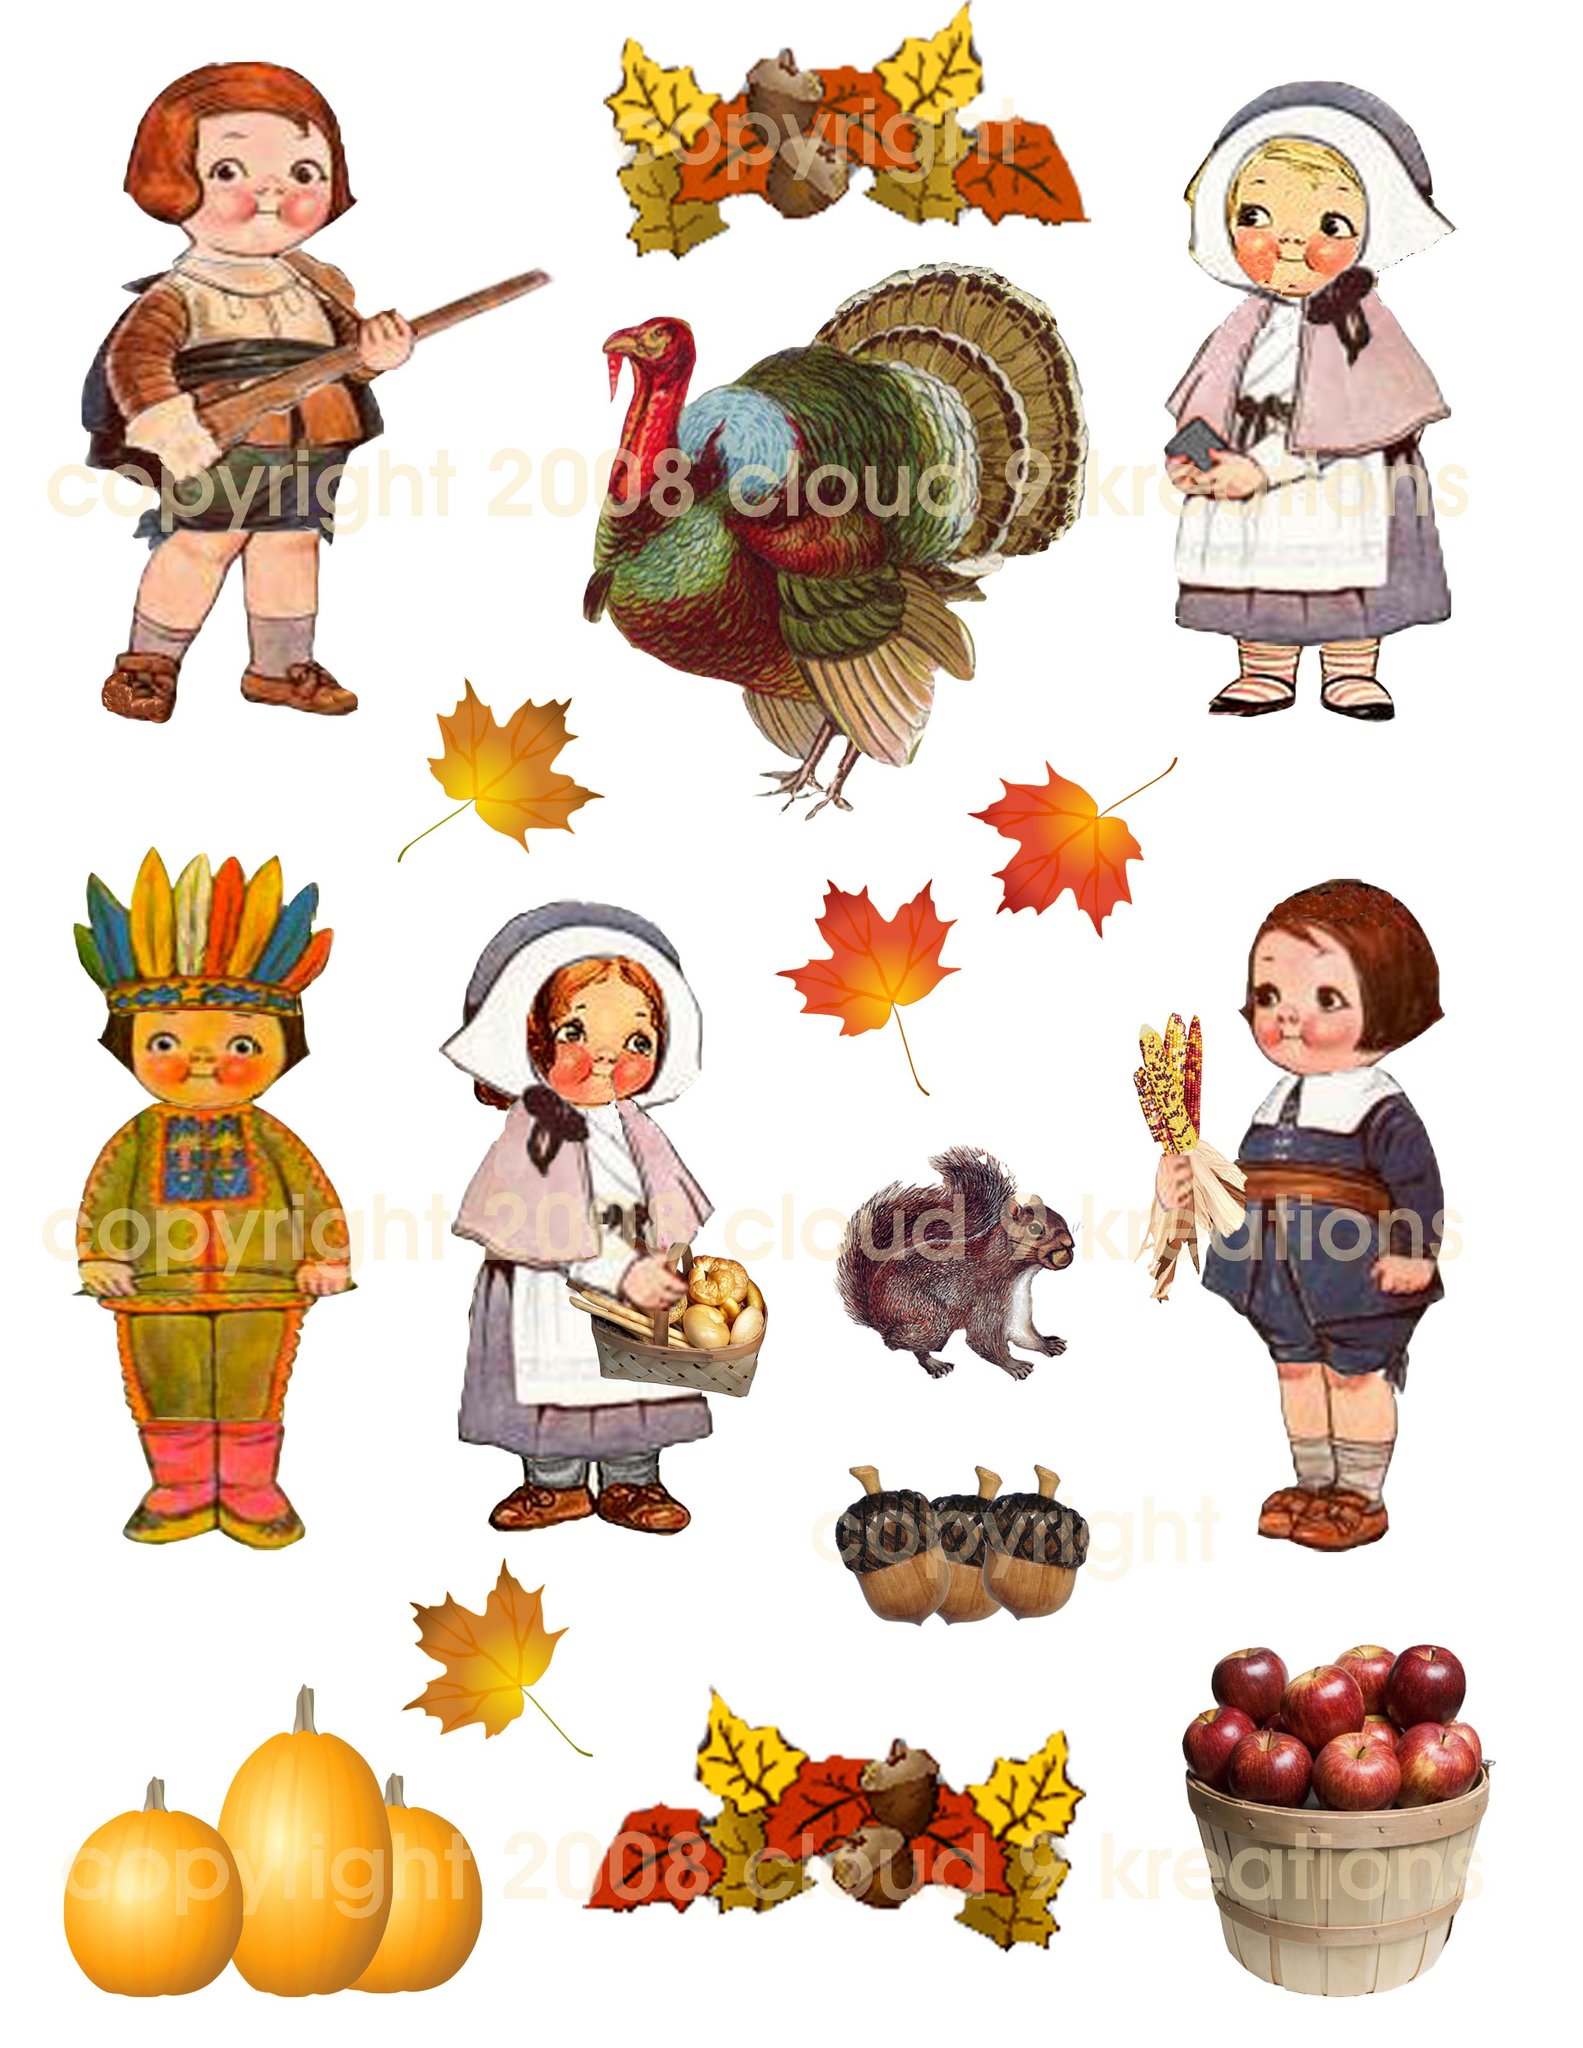 Thanksgiving Dolly Dingle Digital Collage Sheet.